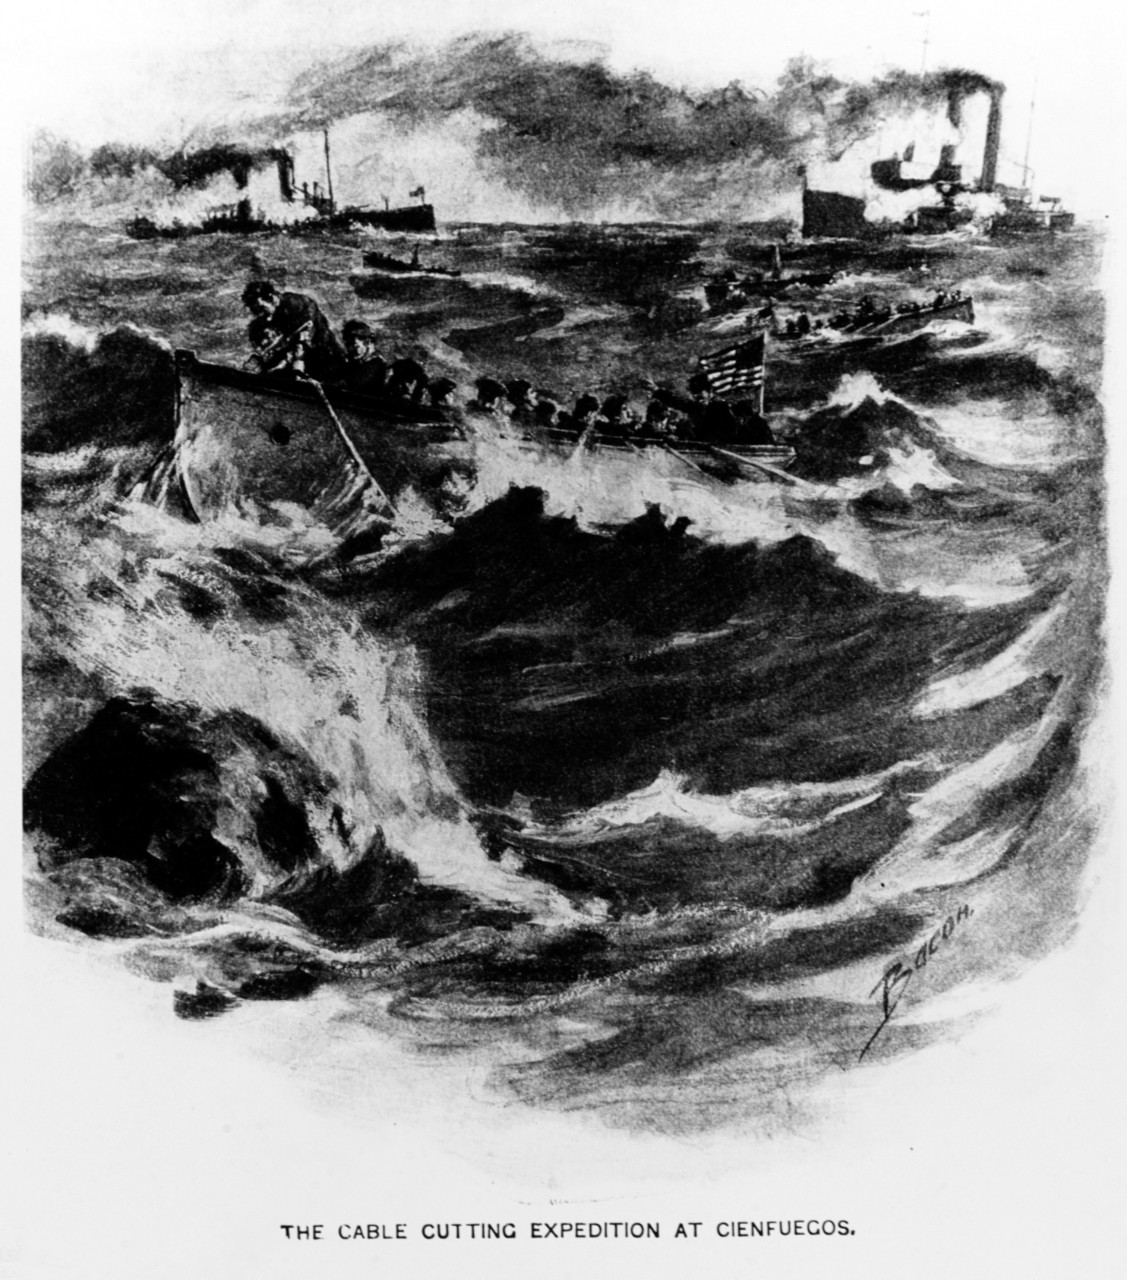 A depiction of the U.S. cable-cutting expedition at Cienfuegos published in 1907.